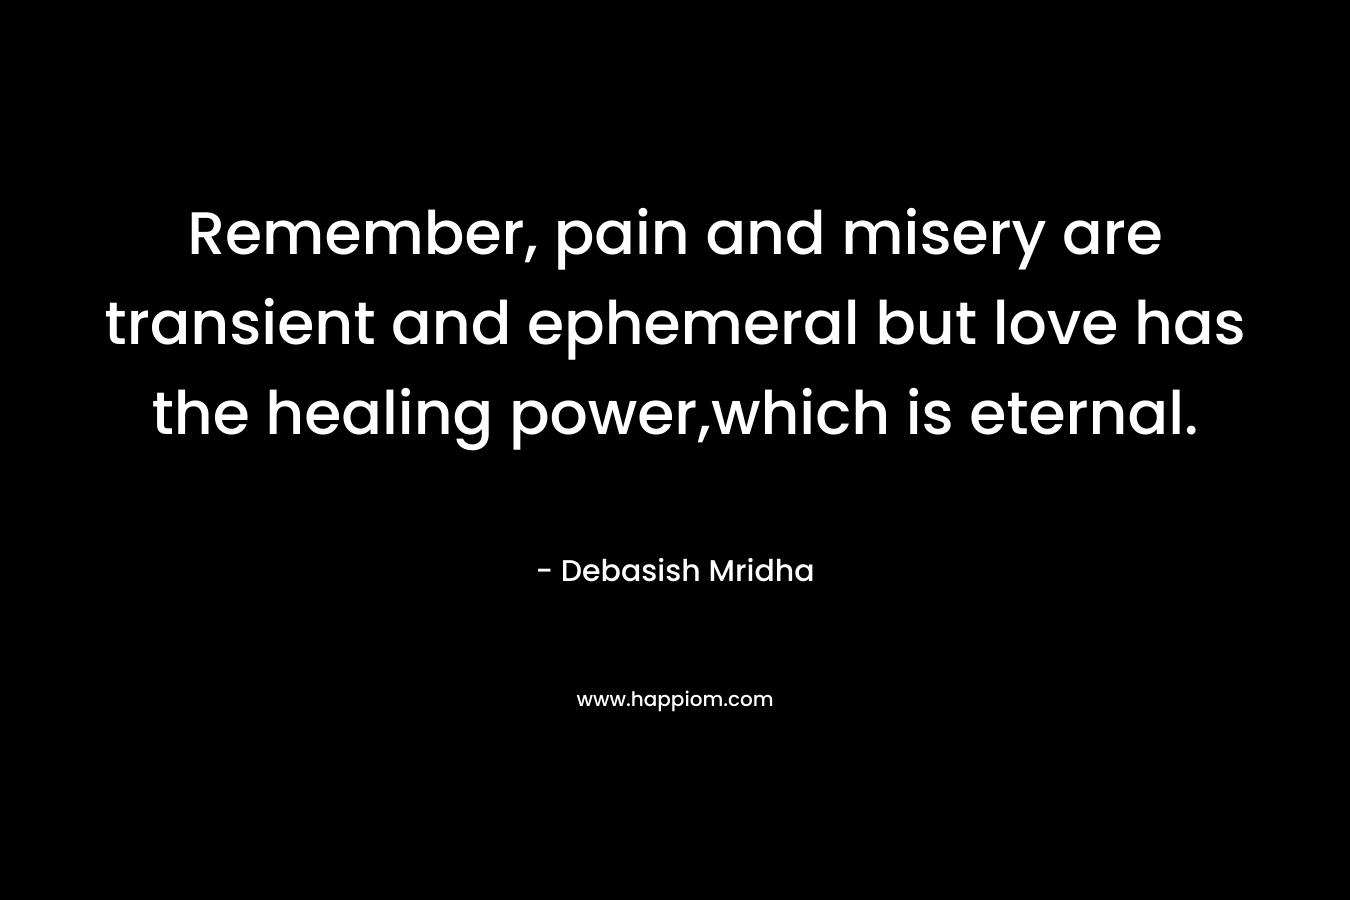 Remember, pain and misery are transient and ephemeral but love has the healing power,which is eternal.